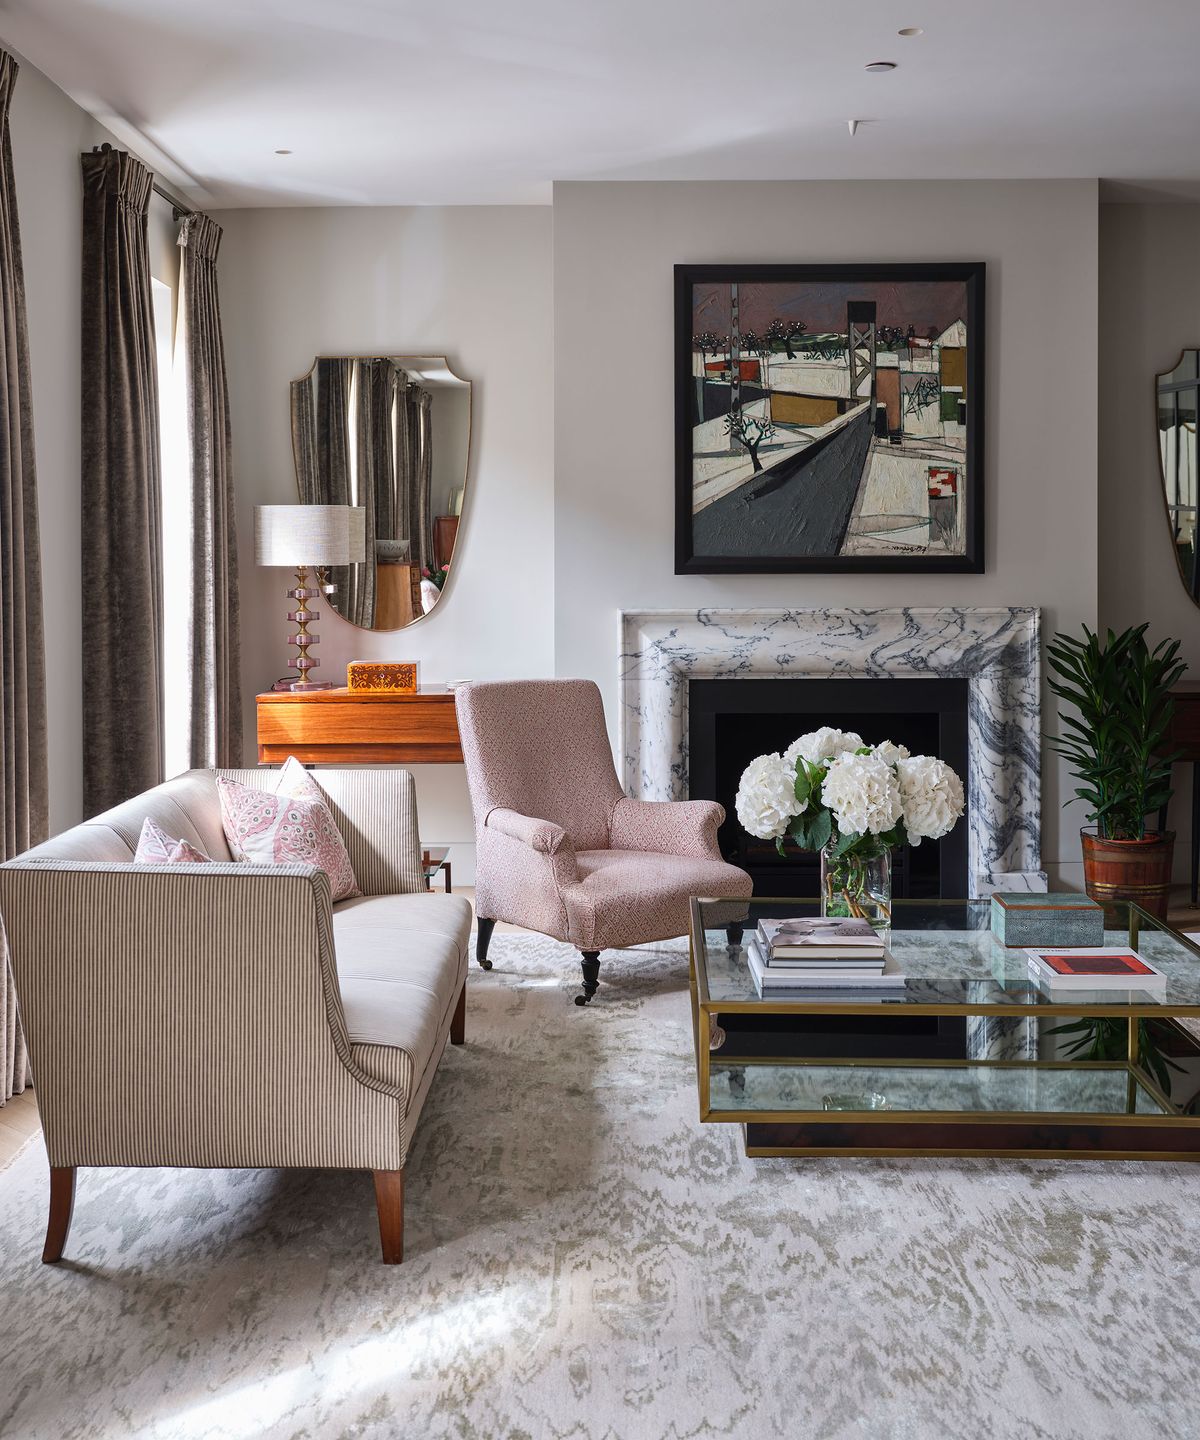 Neutral room ideas: 15 ways to use timeless shades